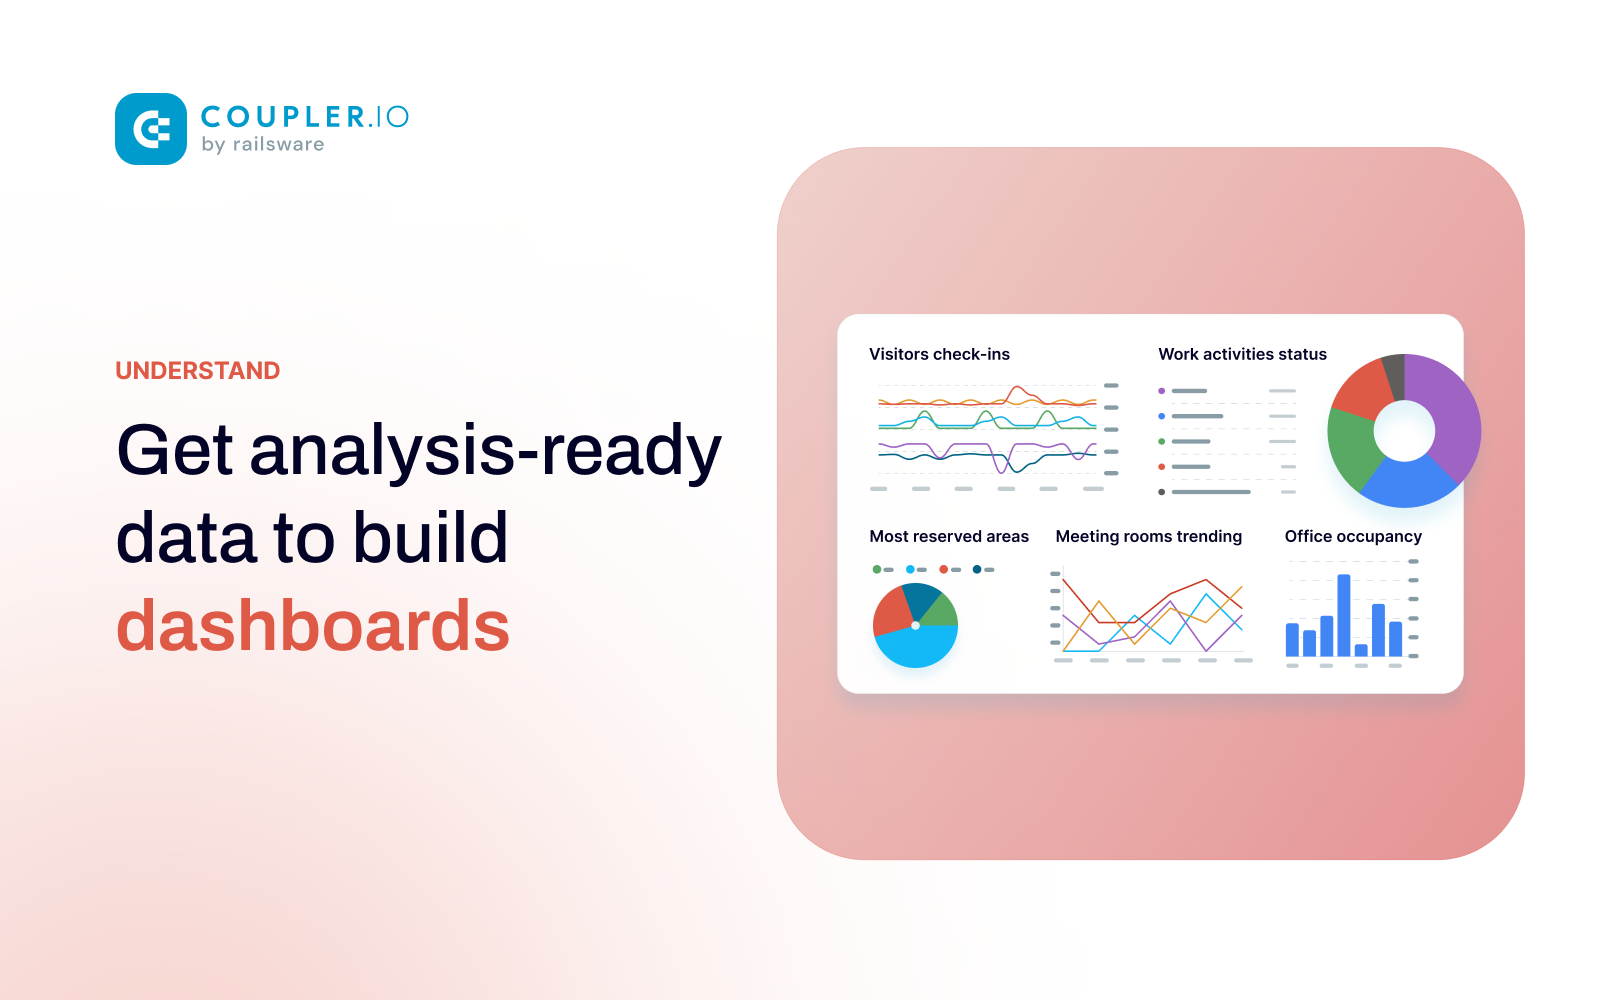 Get analysis-ready data to build dashboards